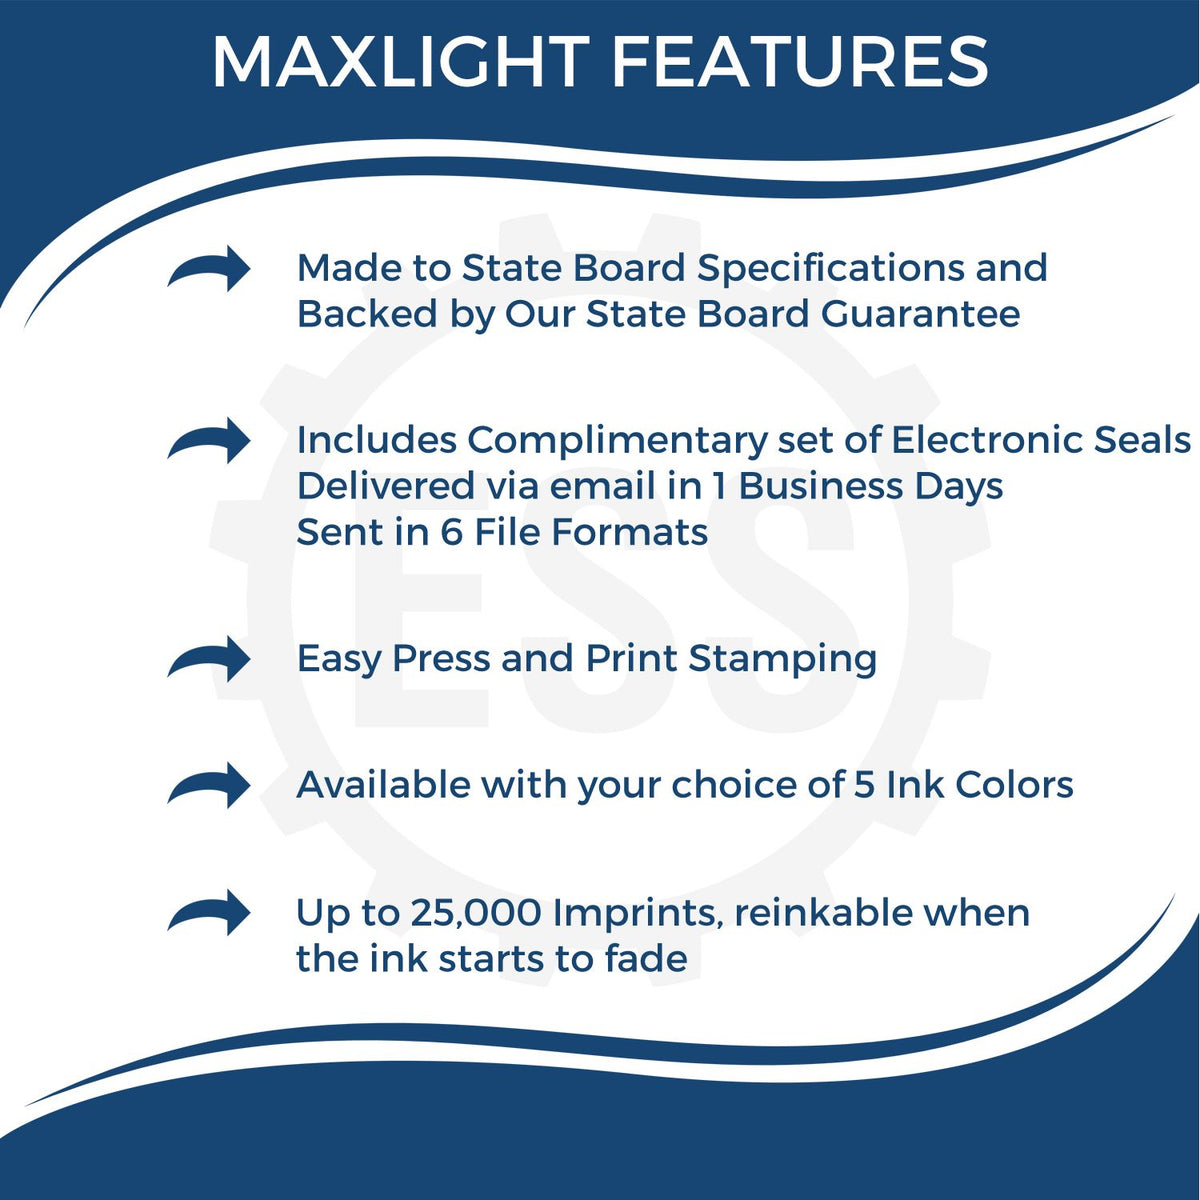 A picture of an infographic highlighting the selling points for the Premium MaxLight Pre-Inked North Dakota Engineering Stamp